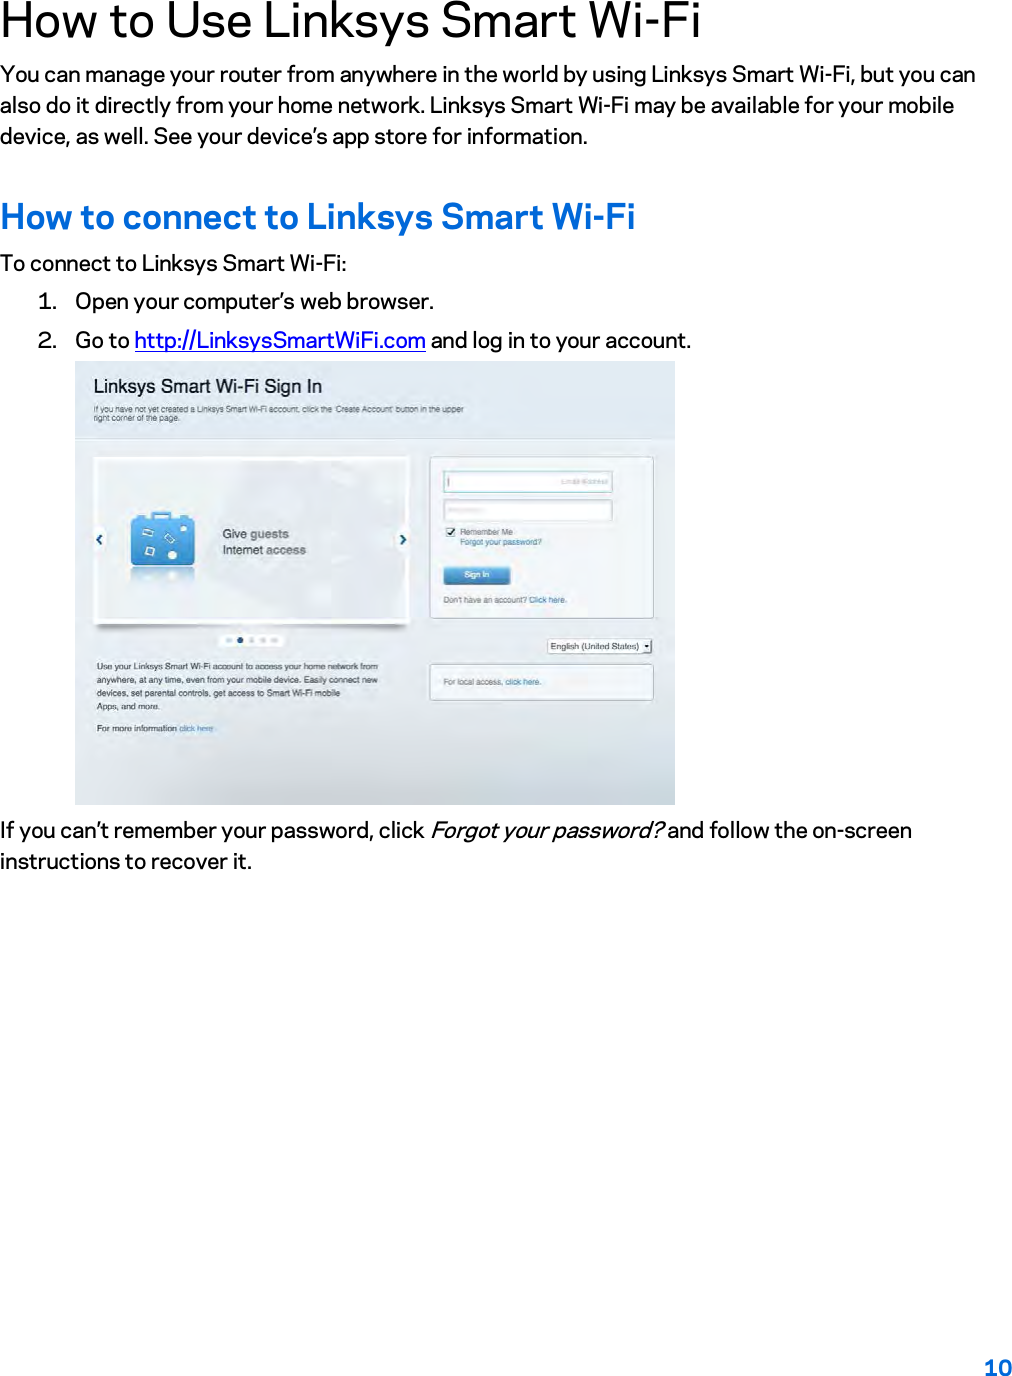 10  How to Use Linksys Smart Wi-Fi You can manage your router from anywhere in the world by using Linksys Smart Wi-Fi, but you can also do it directly from your home network. Linksys Smart Wi-Fi may be available for your mobile device, as well. See your device’s app store for information. How to connect to Linksys Smart Wi-Fi To connect to Linksys Smart Wi-Fi: 1. Open your computer’s web browser. 2. Go to http://LinksysSmartWiFi.com and log in to your account.   If you can’t remember your password, click Forgot your password? and follow the on-screen instructions to recover it. 